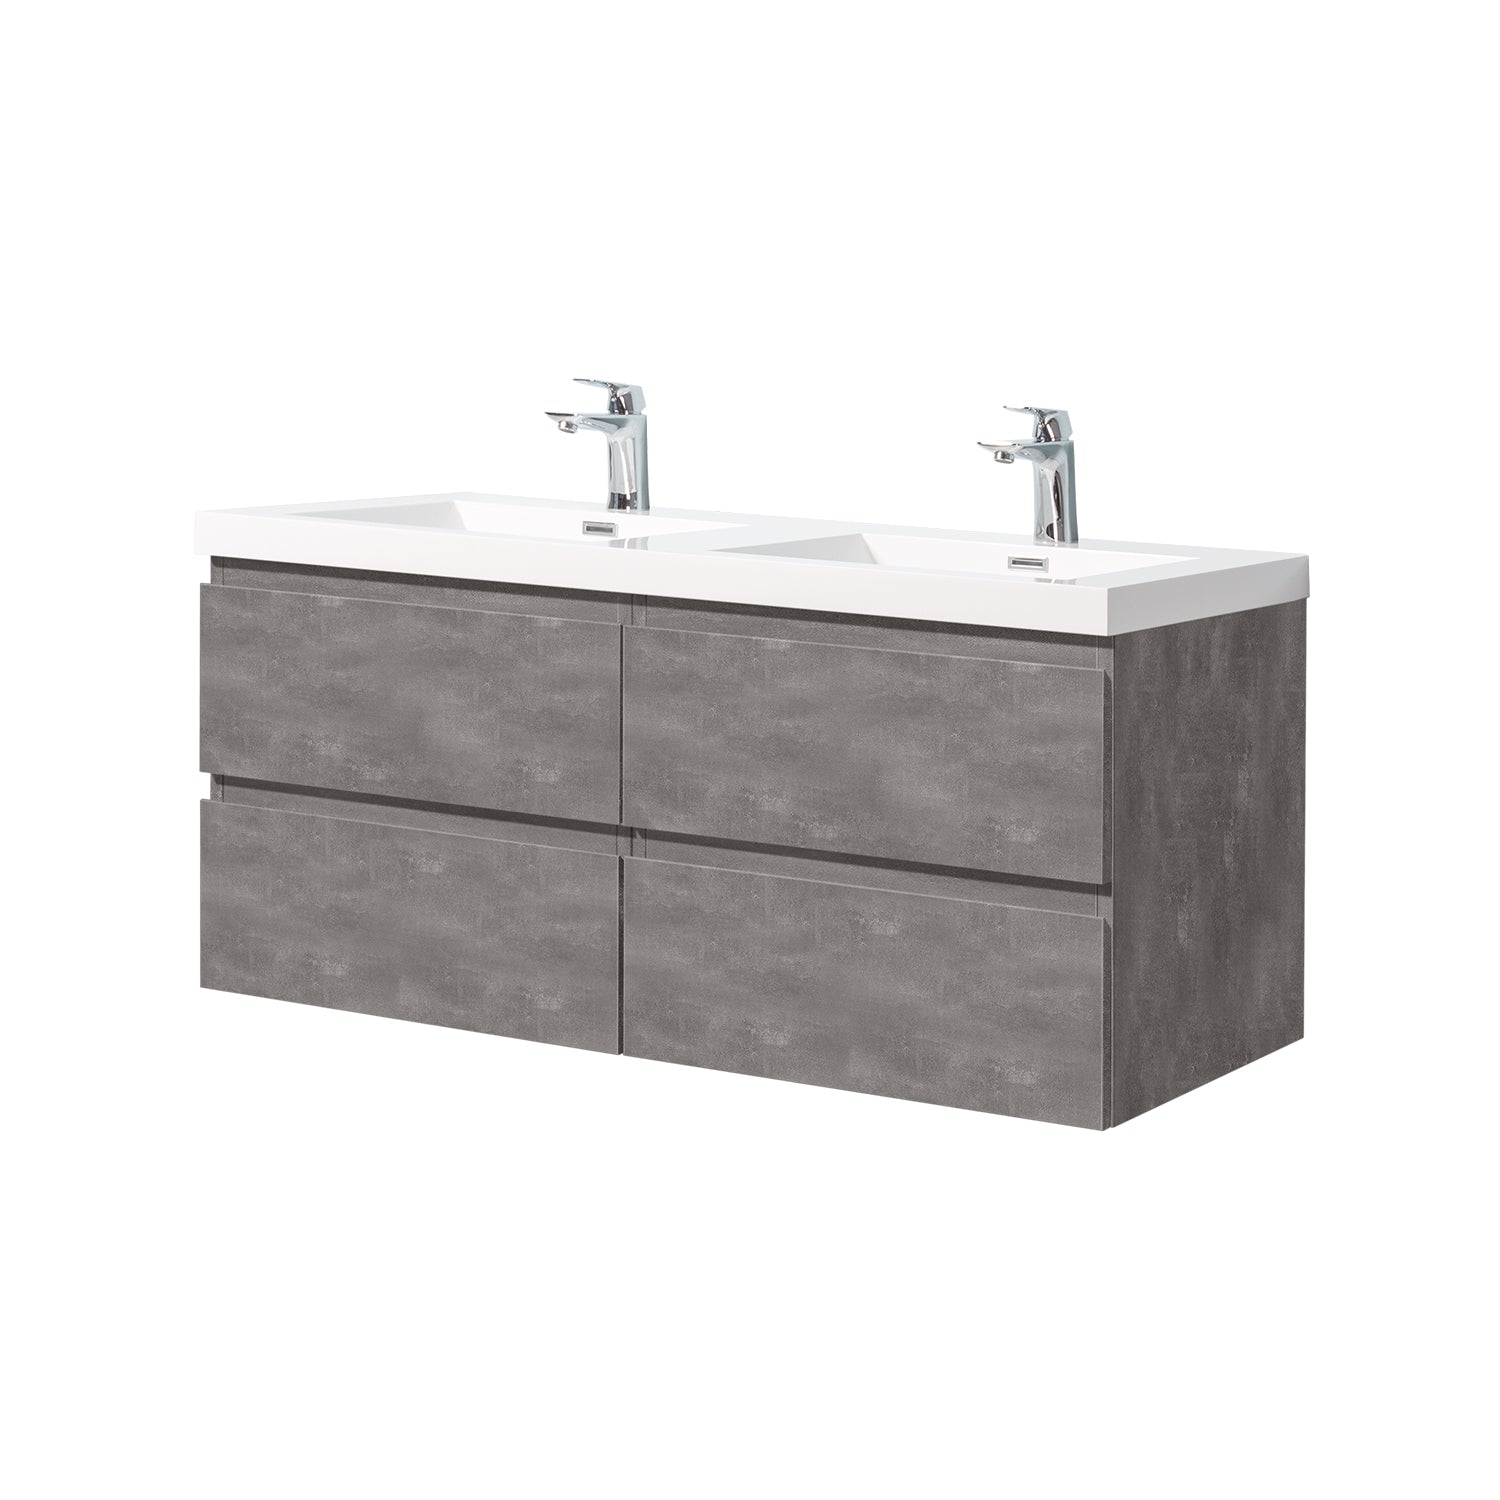 Sinber 48" Wall Mounted Double Rectangular Sink Bathroom Vanity Cabinet with White Acrylic Countertop 4 Drawers, Compact and Elegant with Sleek Design for Modern Bathrooms